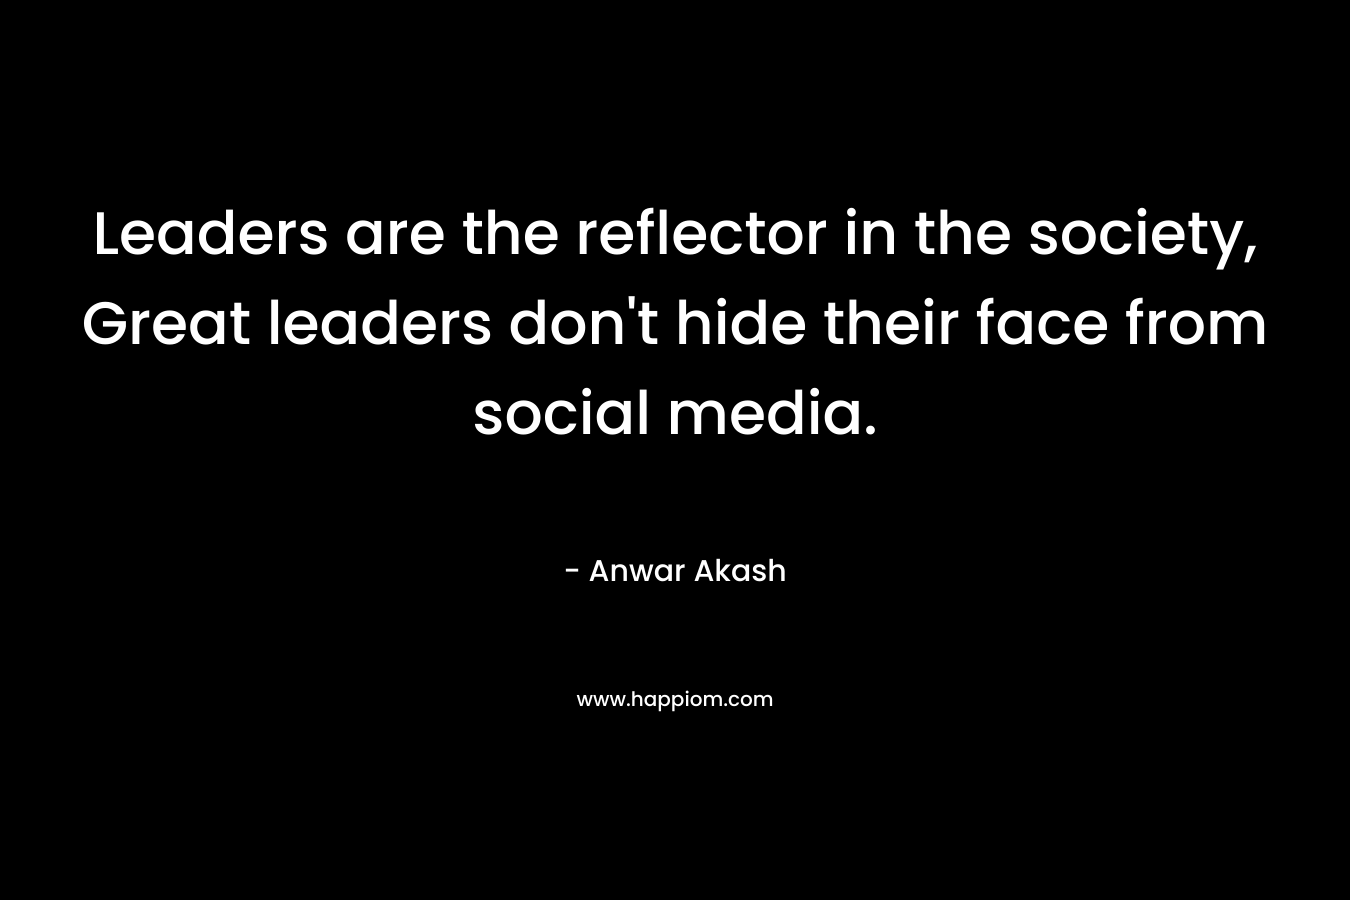 Leaders are the reflector in the society, Great leaders don’t hide their face from social media. – Anwar Akash